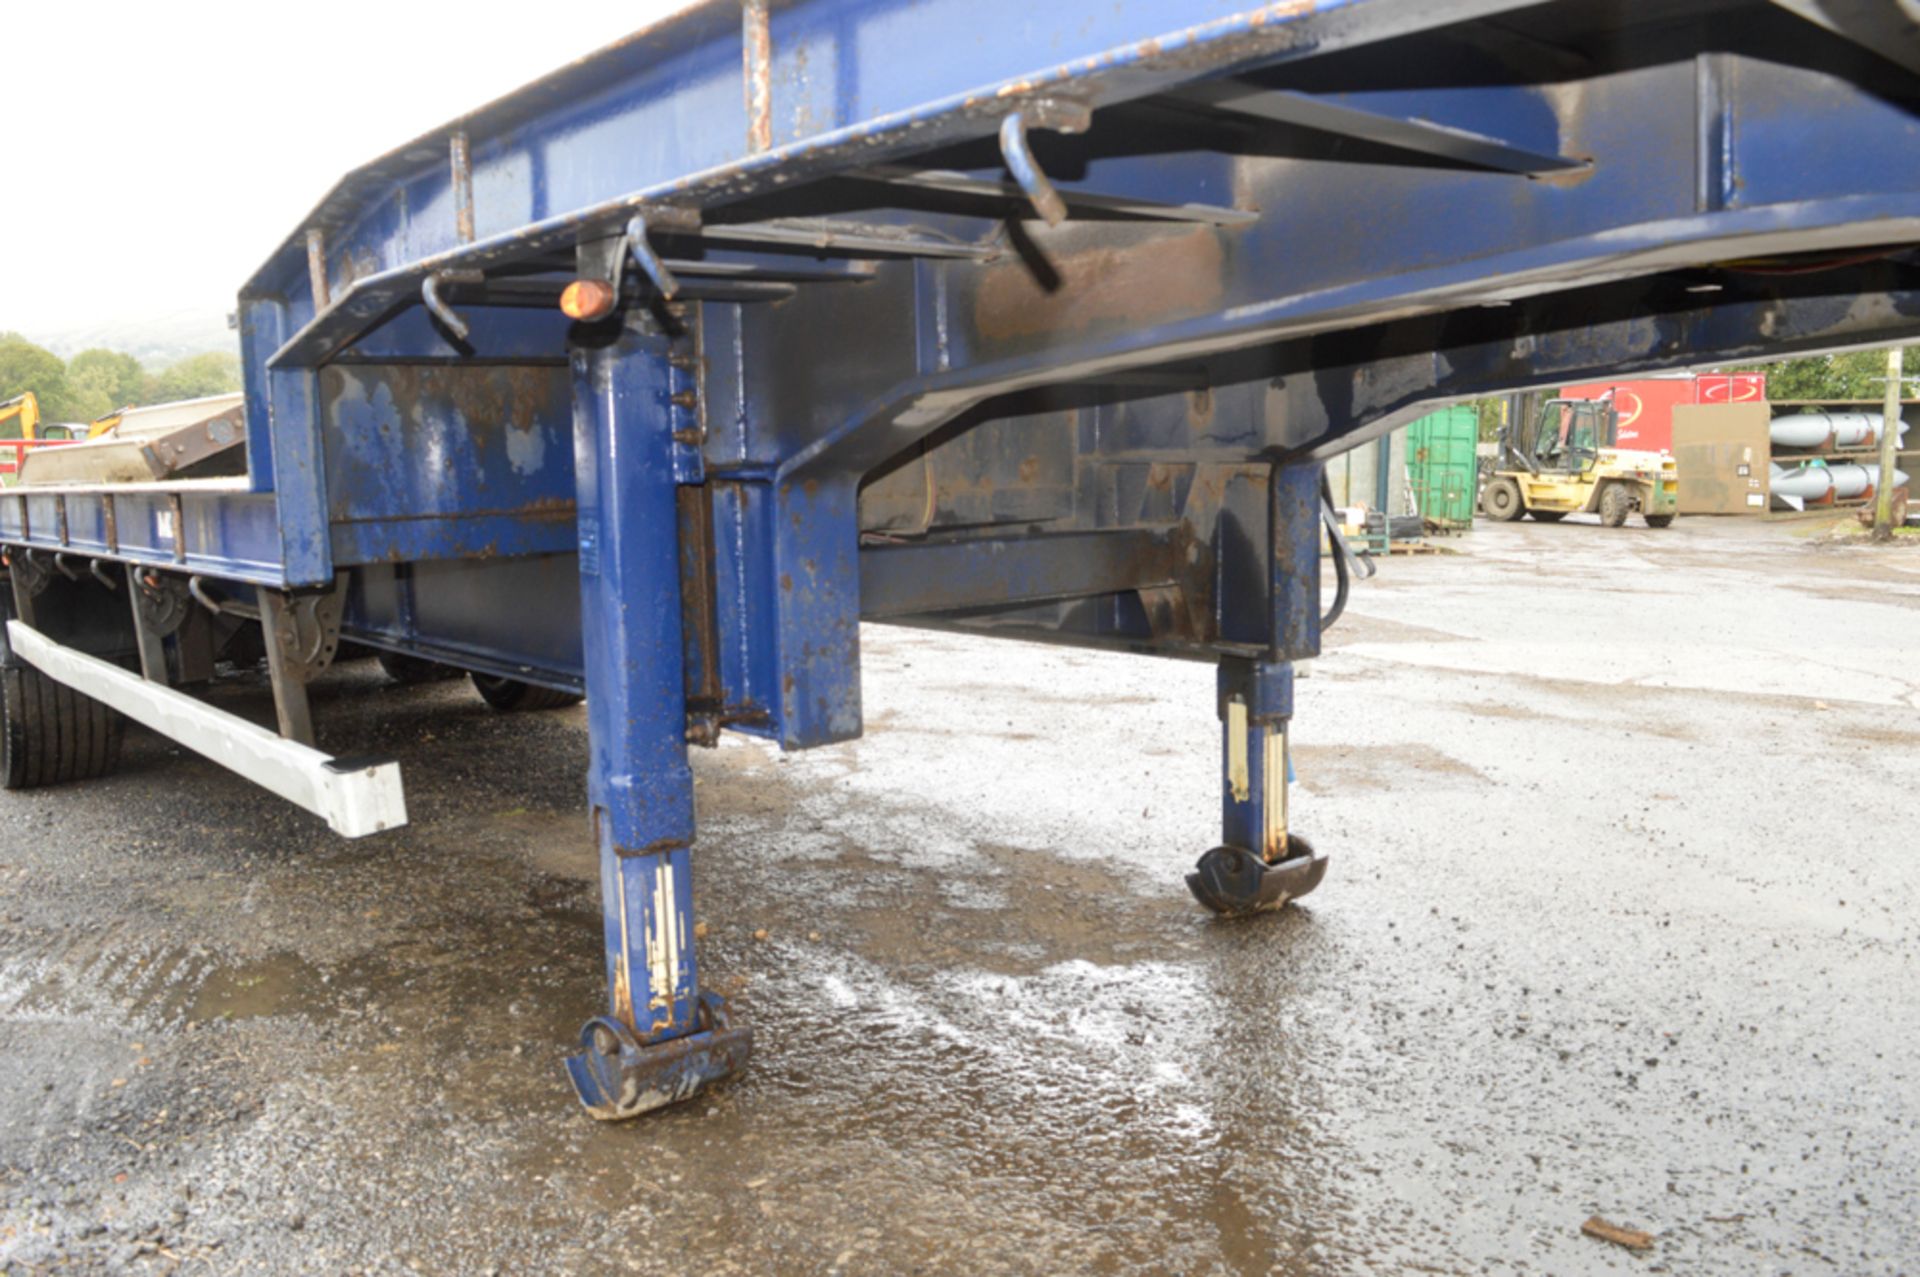 M&G SLC 27Y stepframe low loader trailer Year: 2010 MOT Expires: 30/06/2018 Chassis No: 36465 c/w - Image 6 of 12